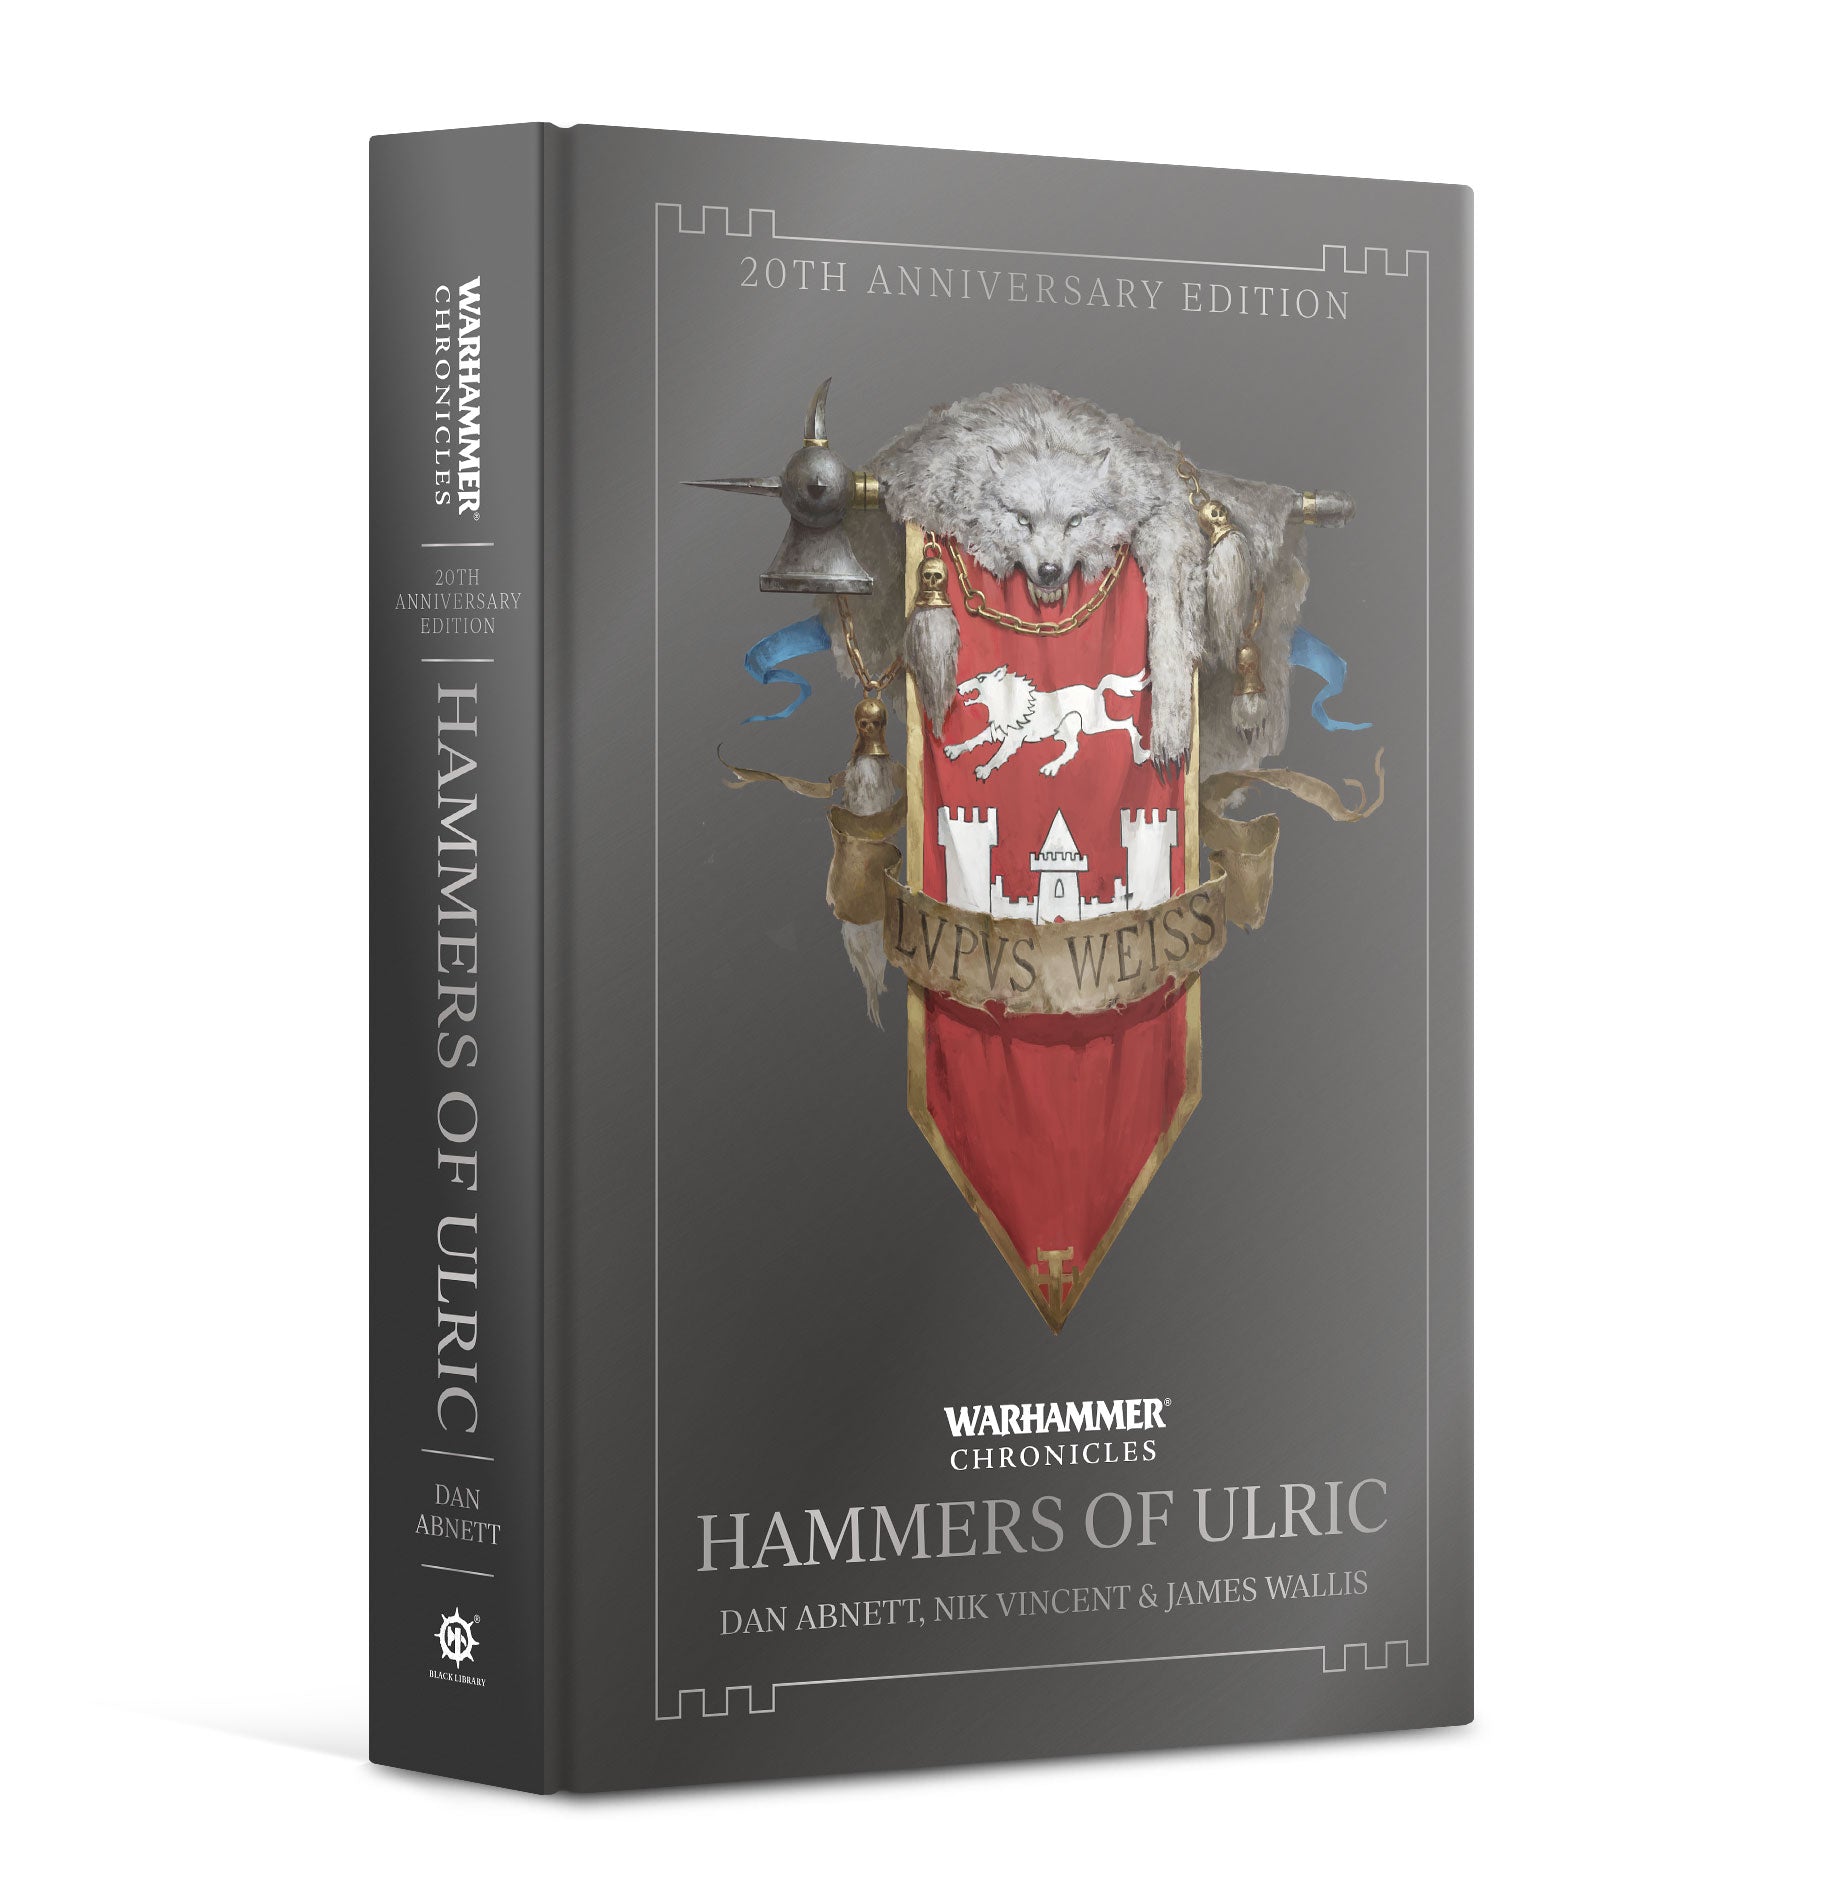 Hammers of Ulric 20th Anniversary Edition (HB)